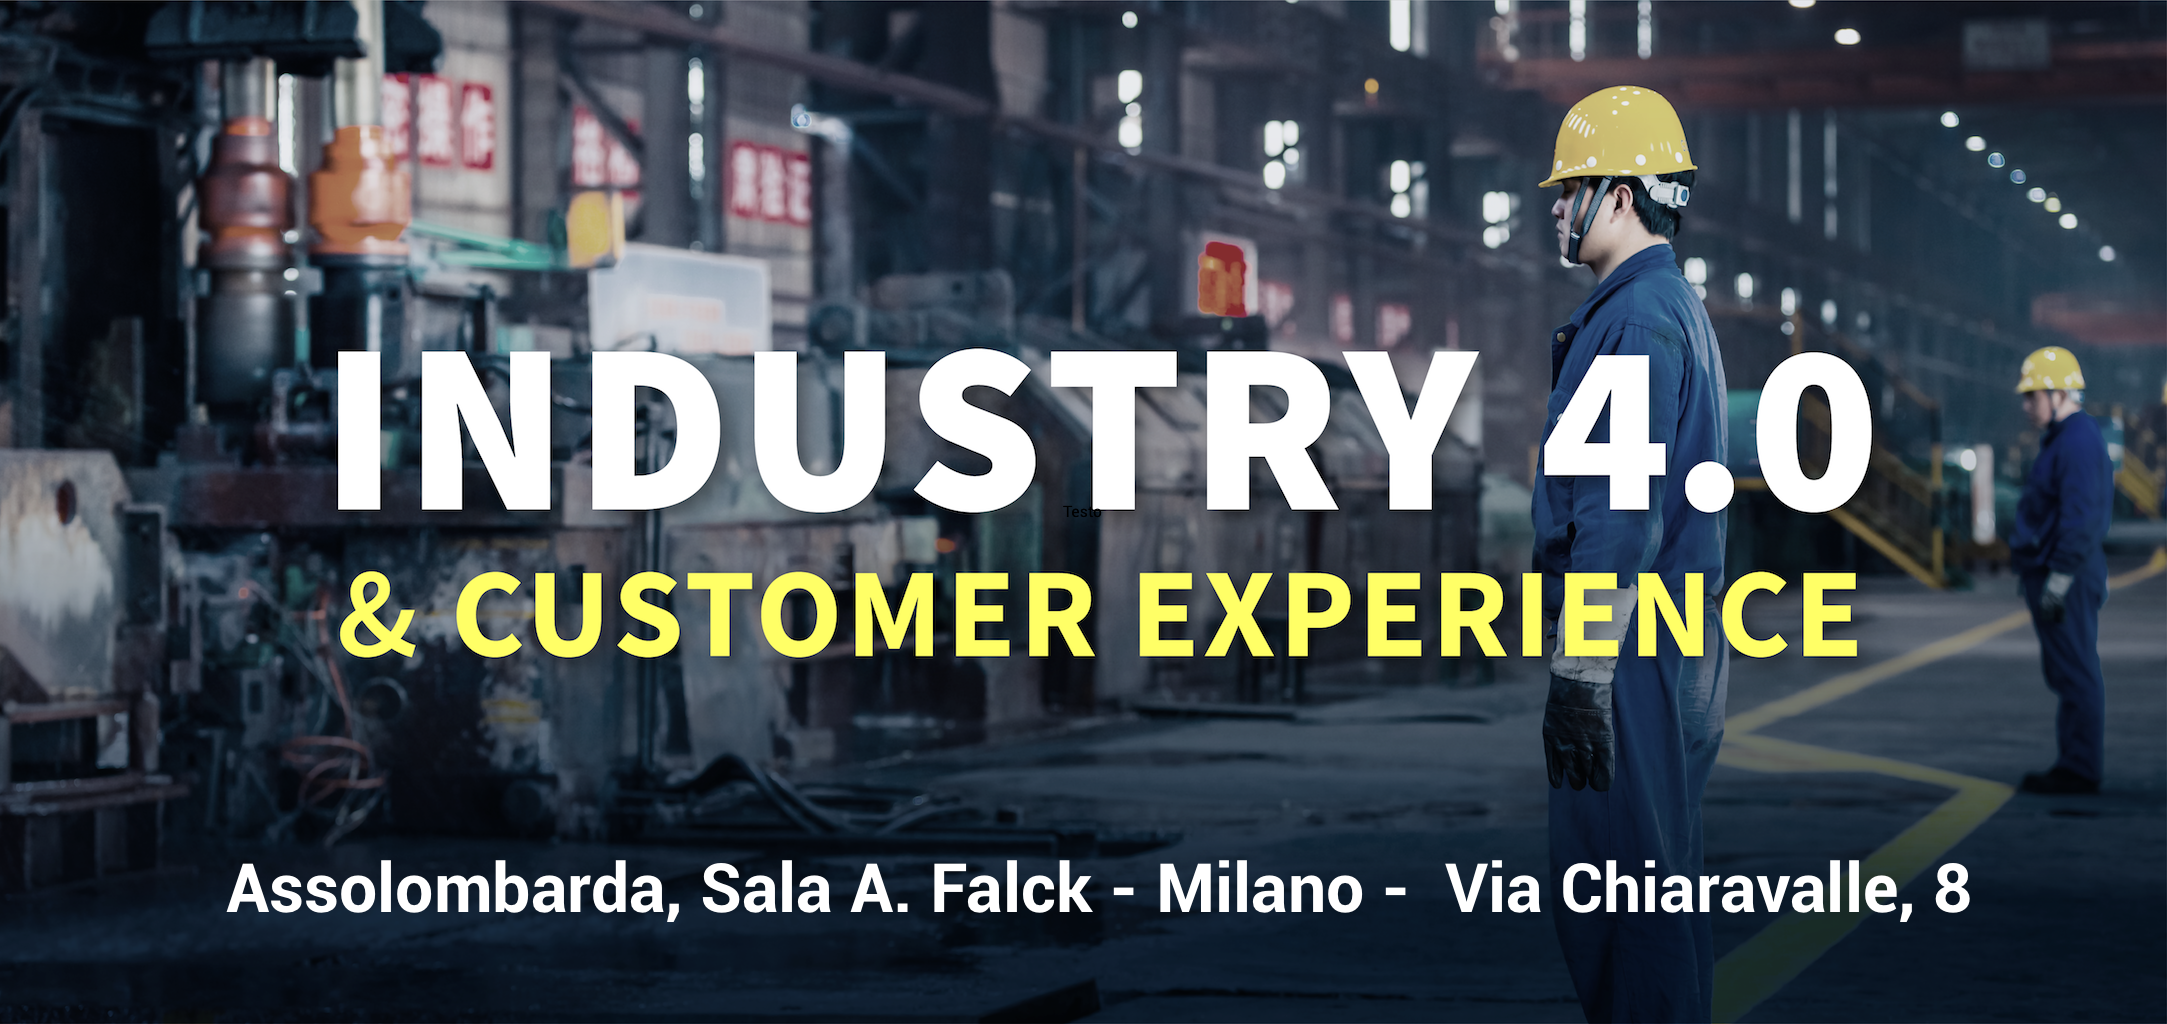 Industry 4.0 & Customer Experience